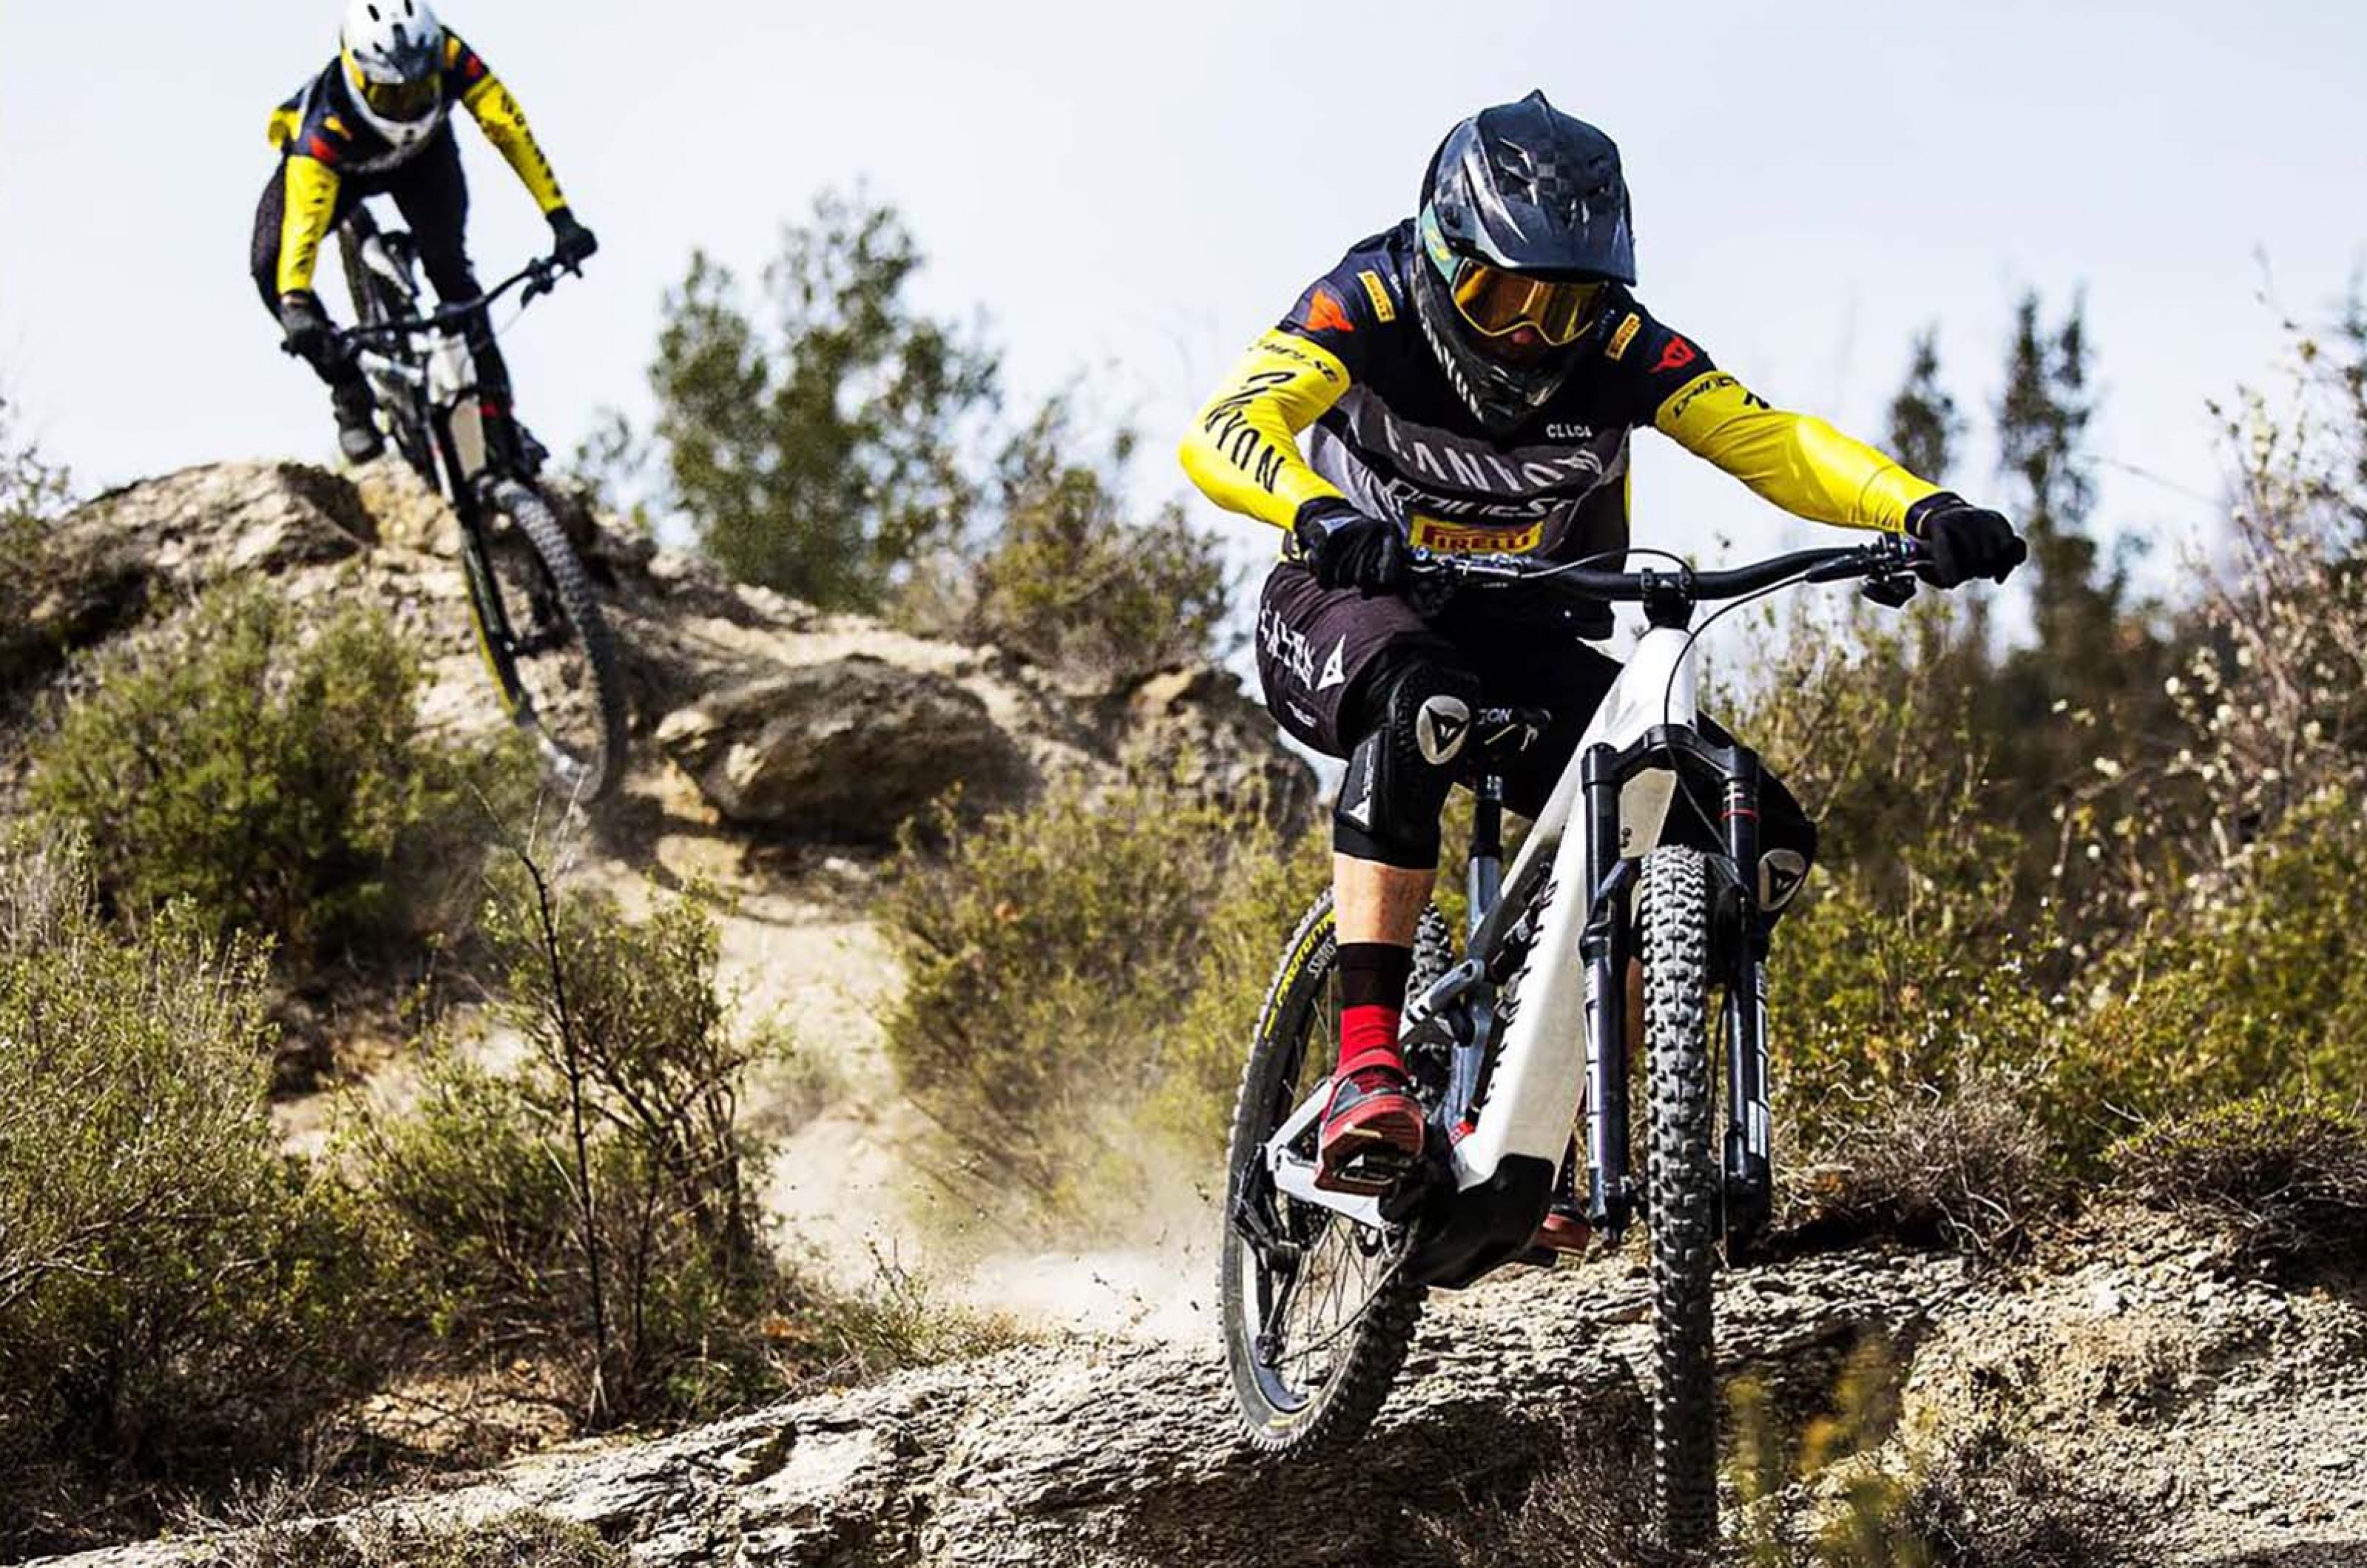 <p>Good ones take the sting out of climbing back up to the start of the run, without feeling heavy or sluggish on the downhills. Let’s take a look at some of the ‘best’ e-MTBs on the market today.</p>